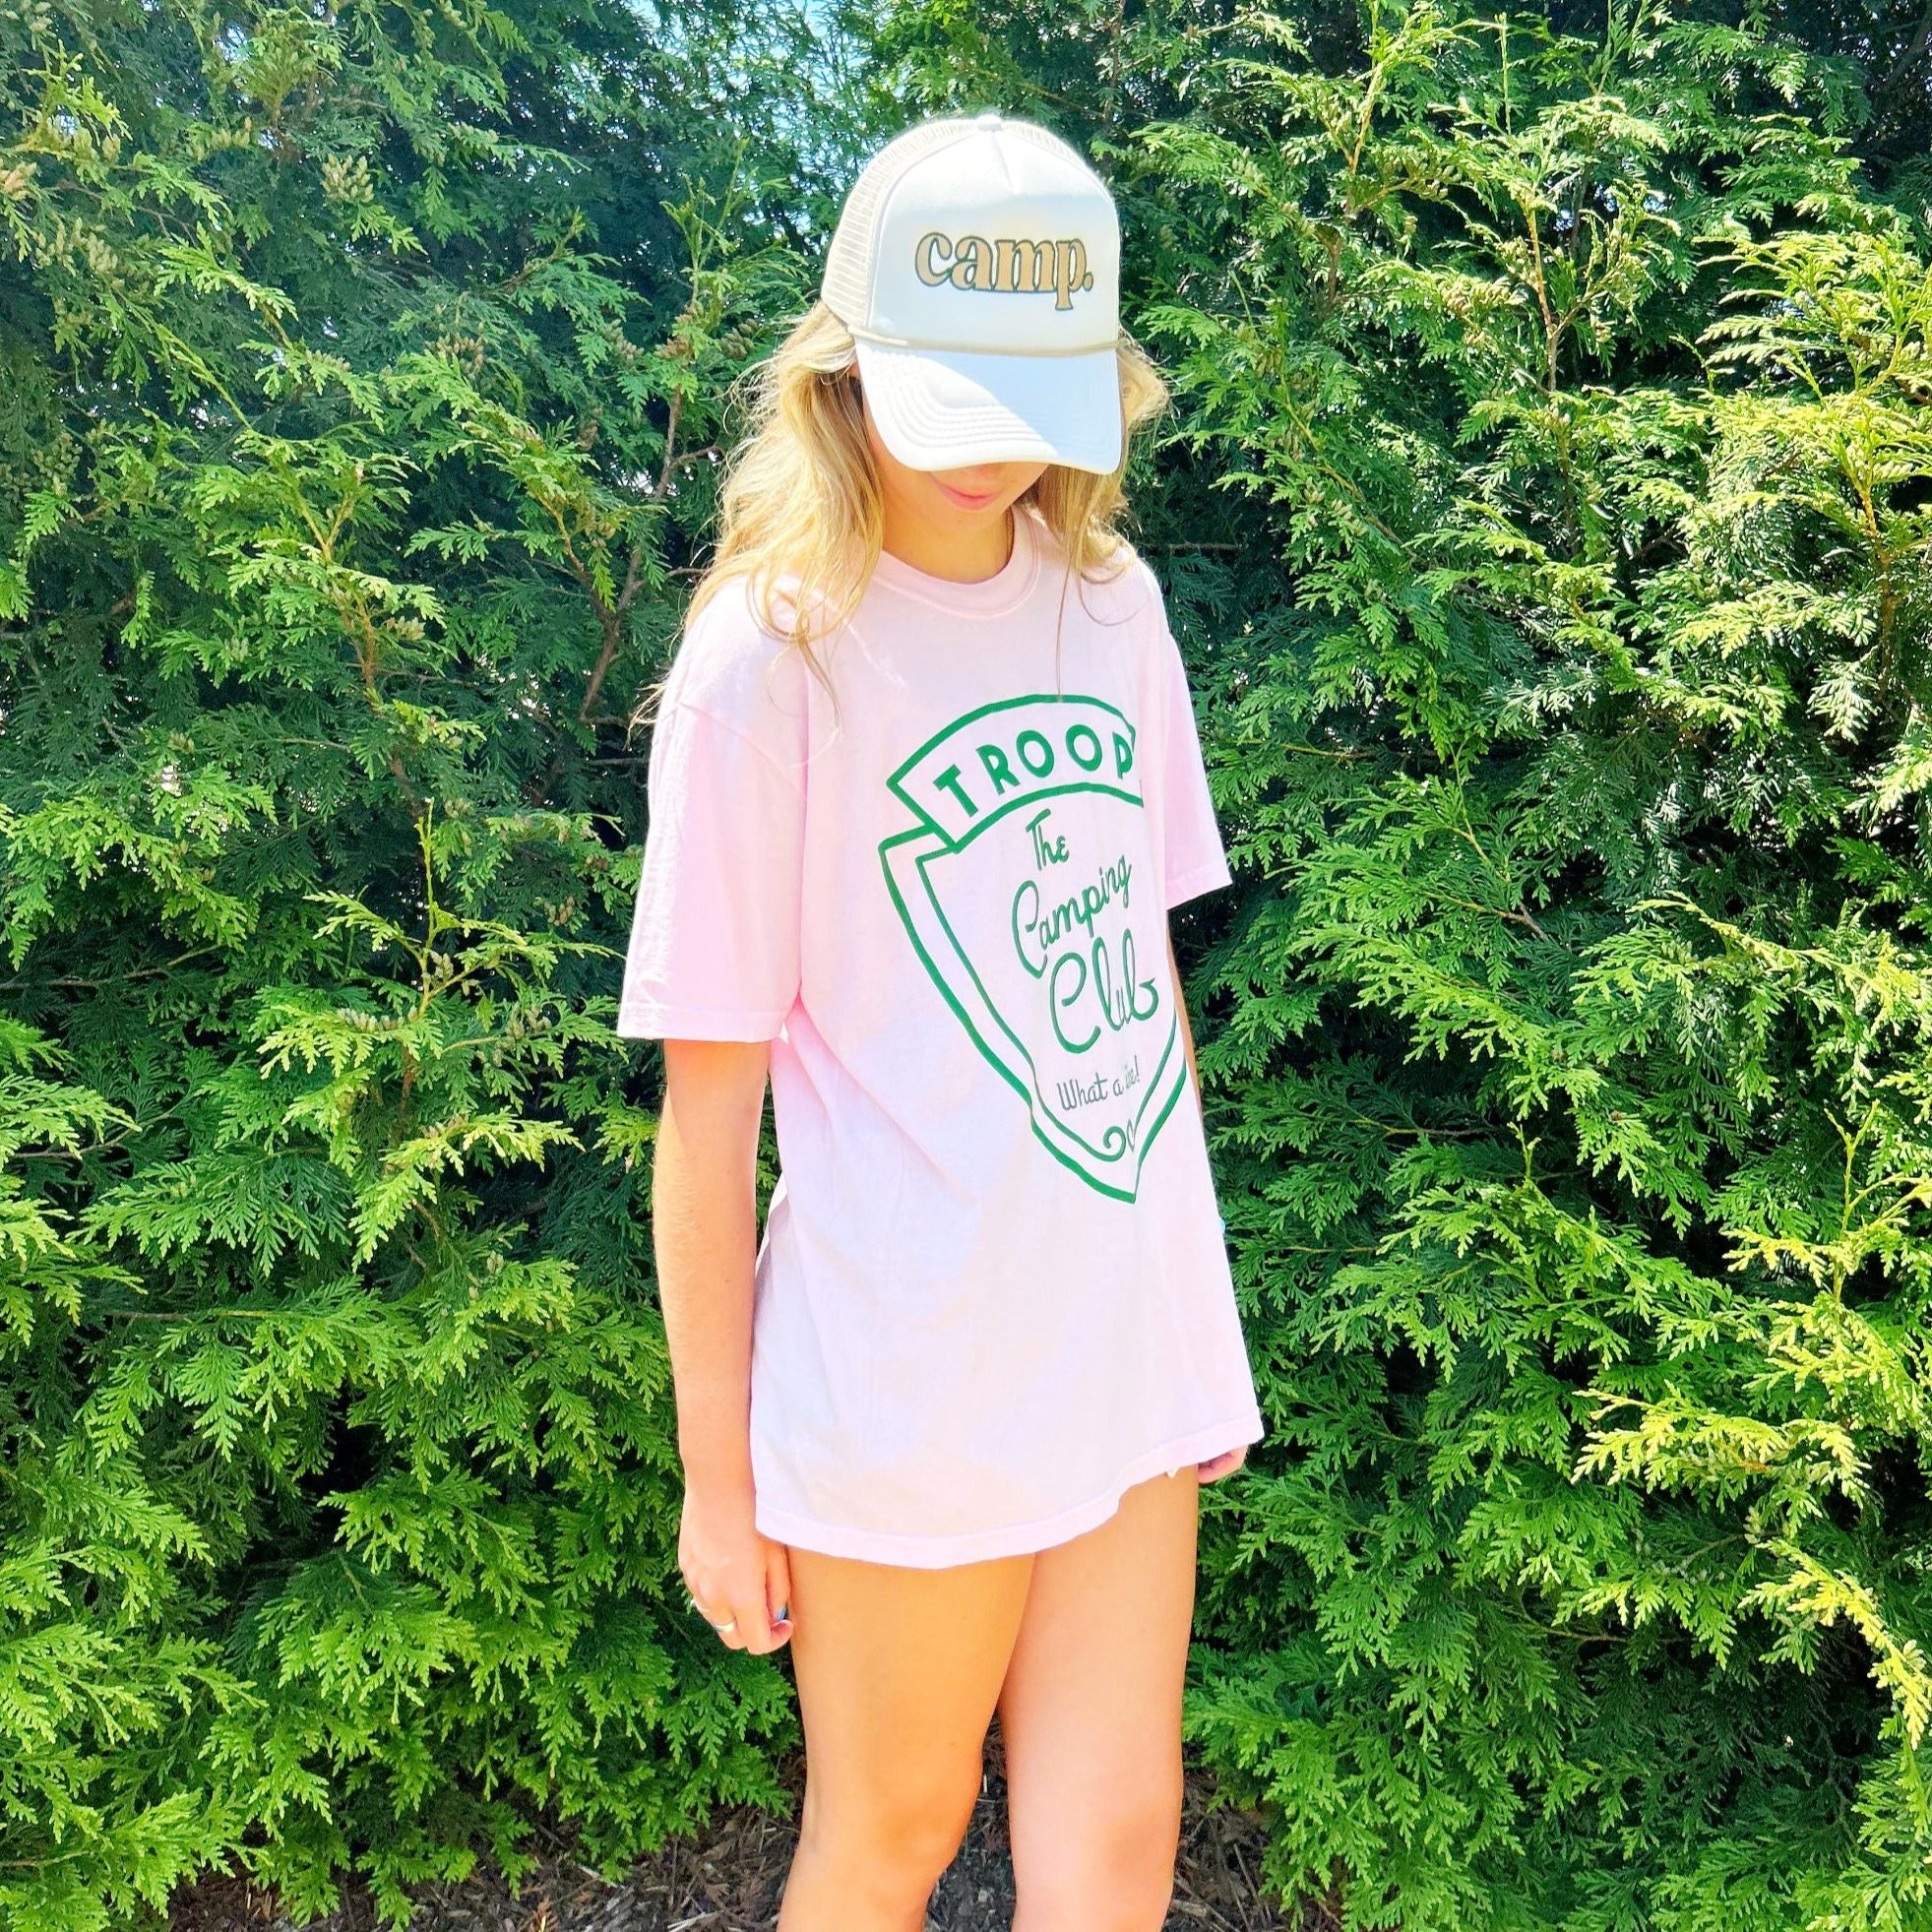 The Camping Club Tee